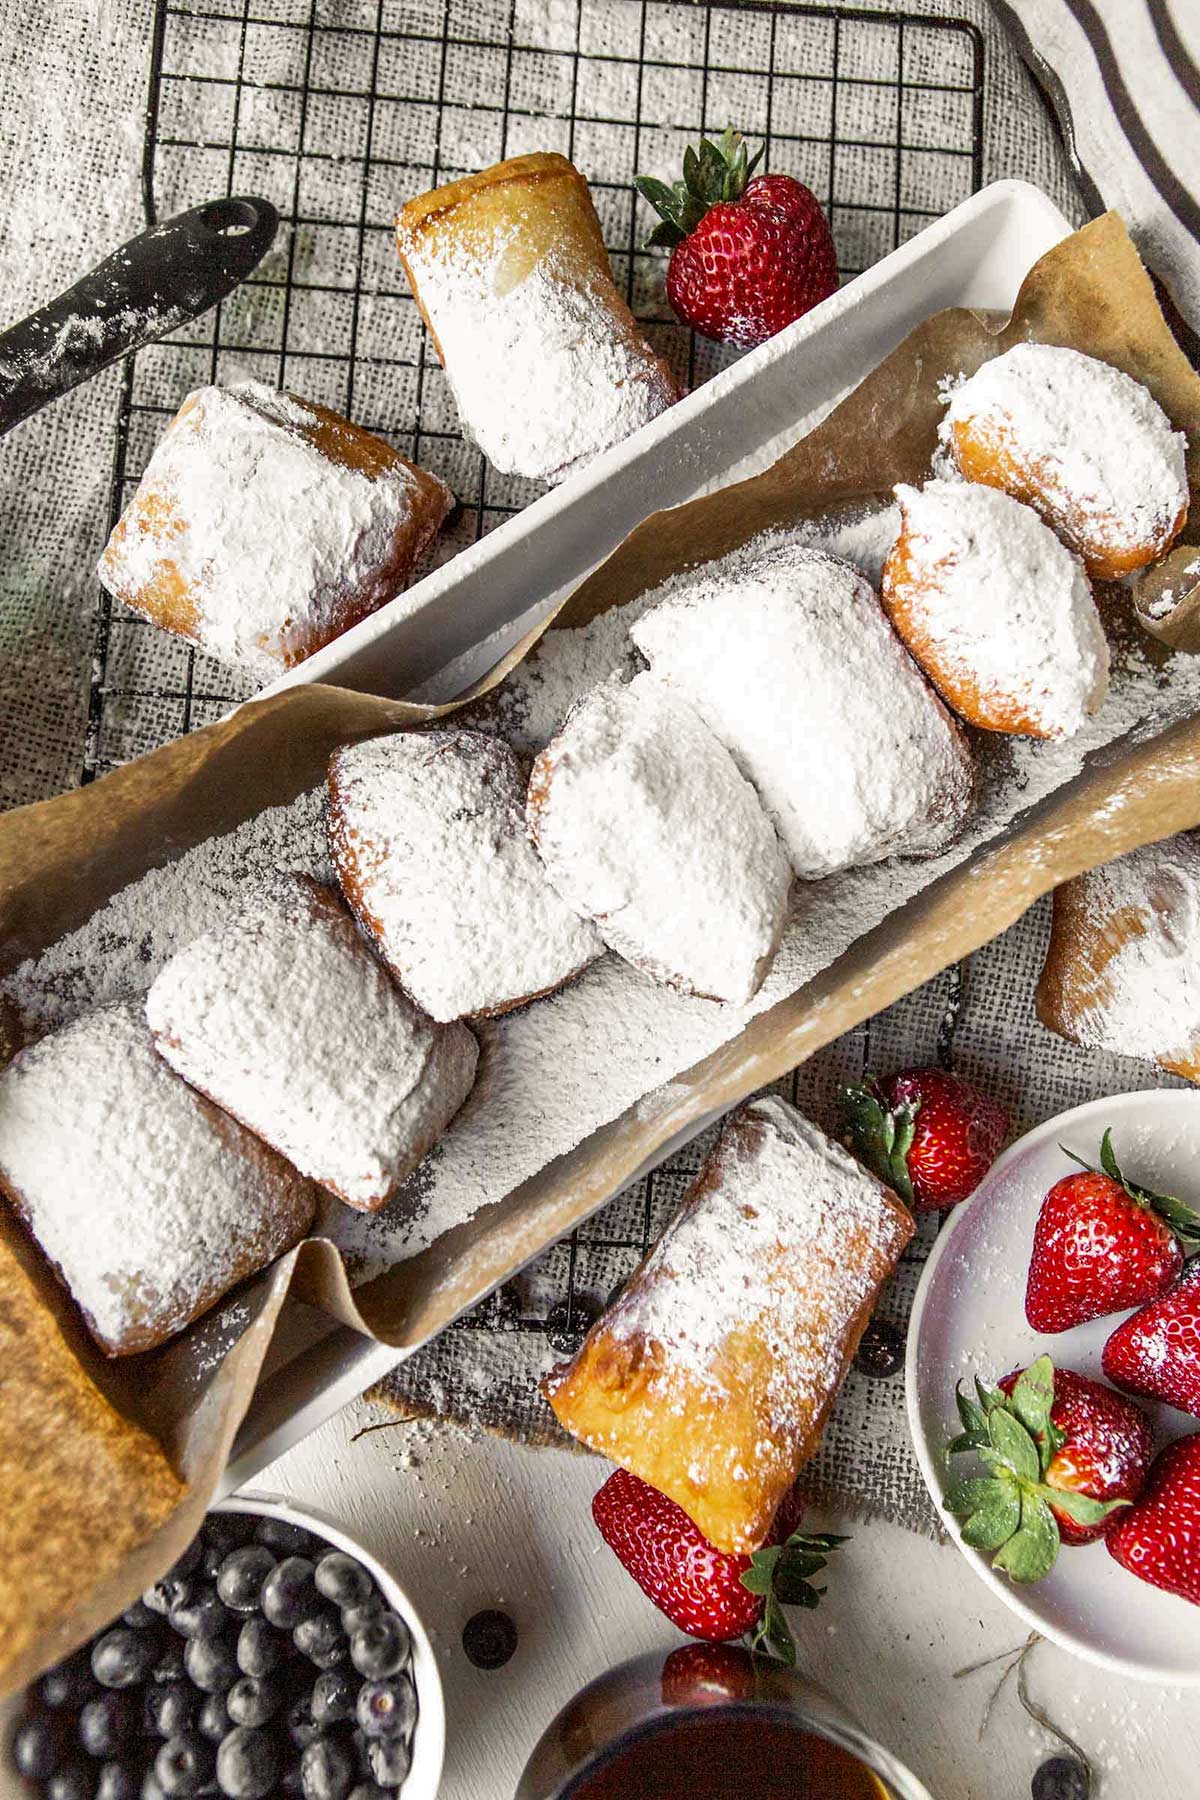 a long bog with brown paper and beignets inside. beignets on the side of the box along with strawberries and blueberries.